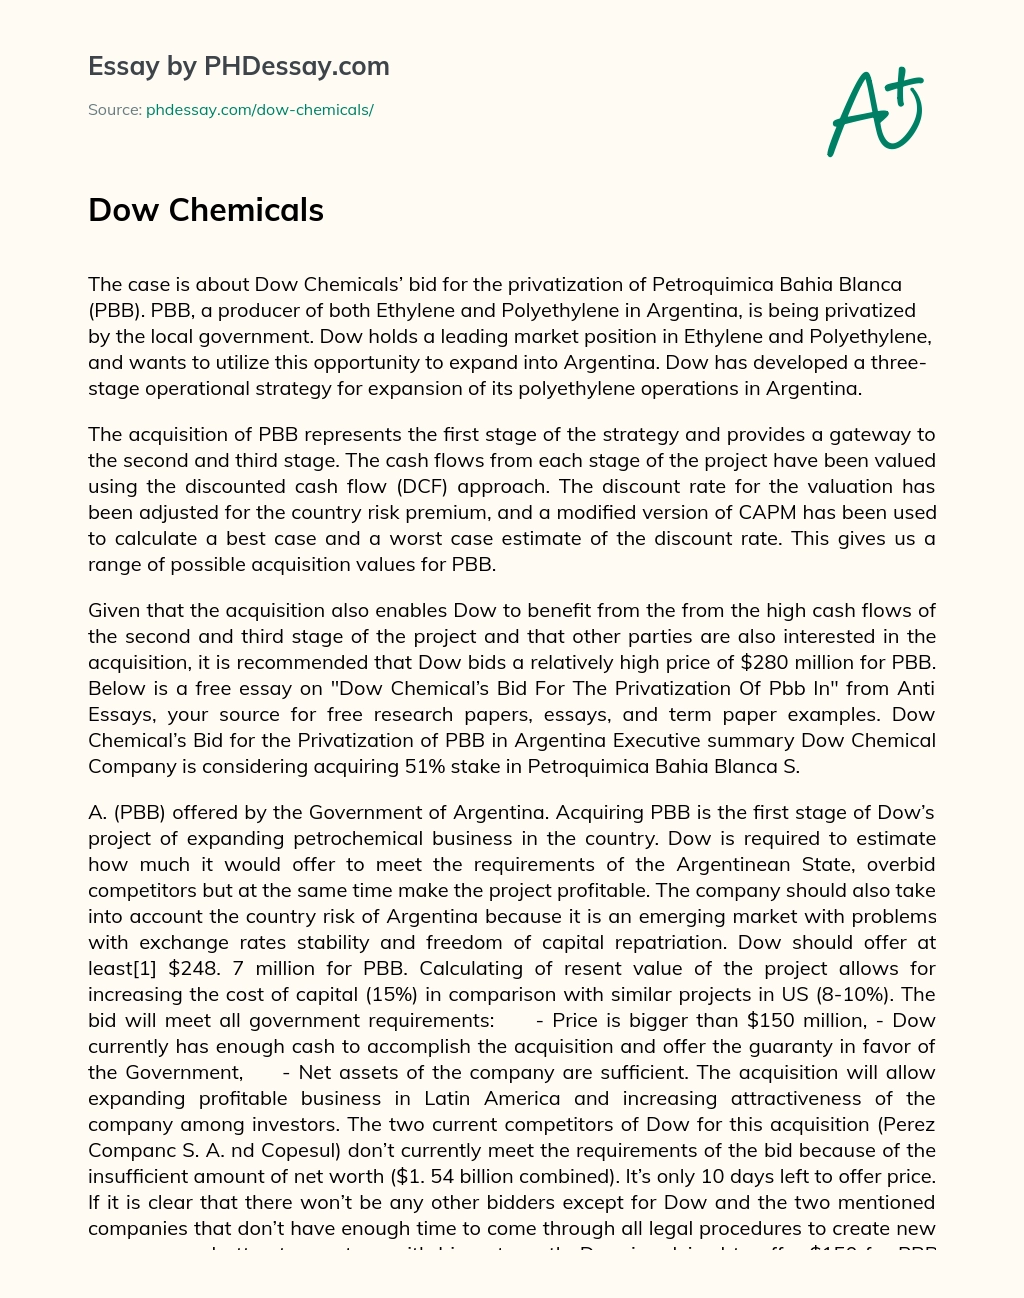 Dow Chemicals essay